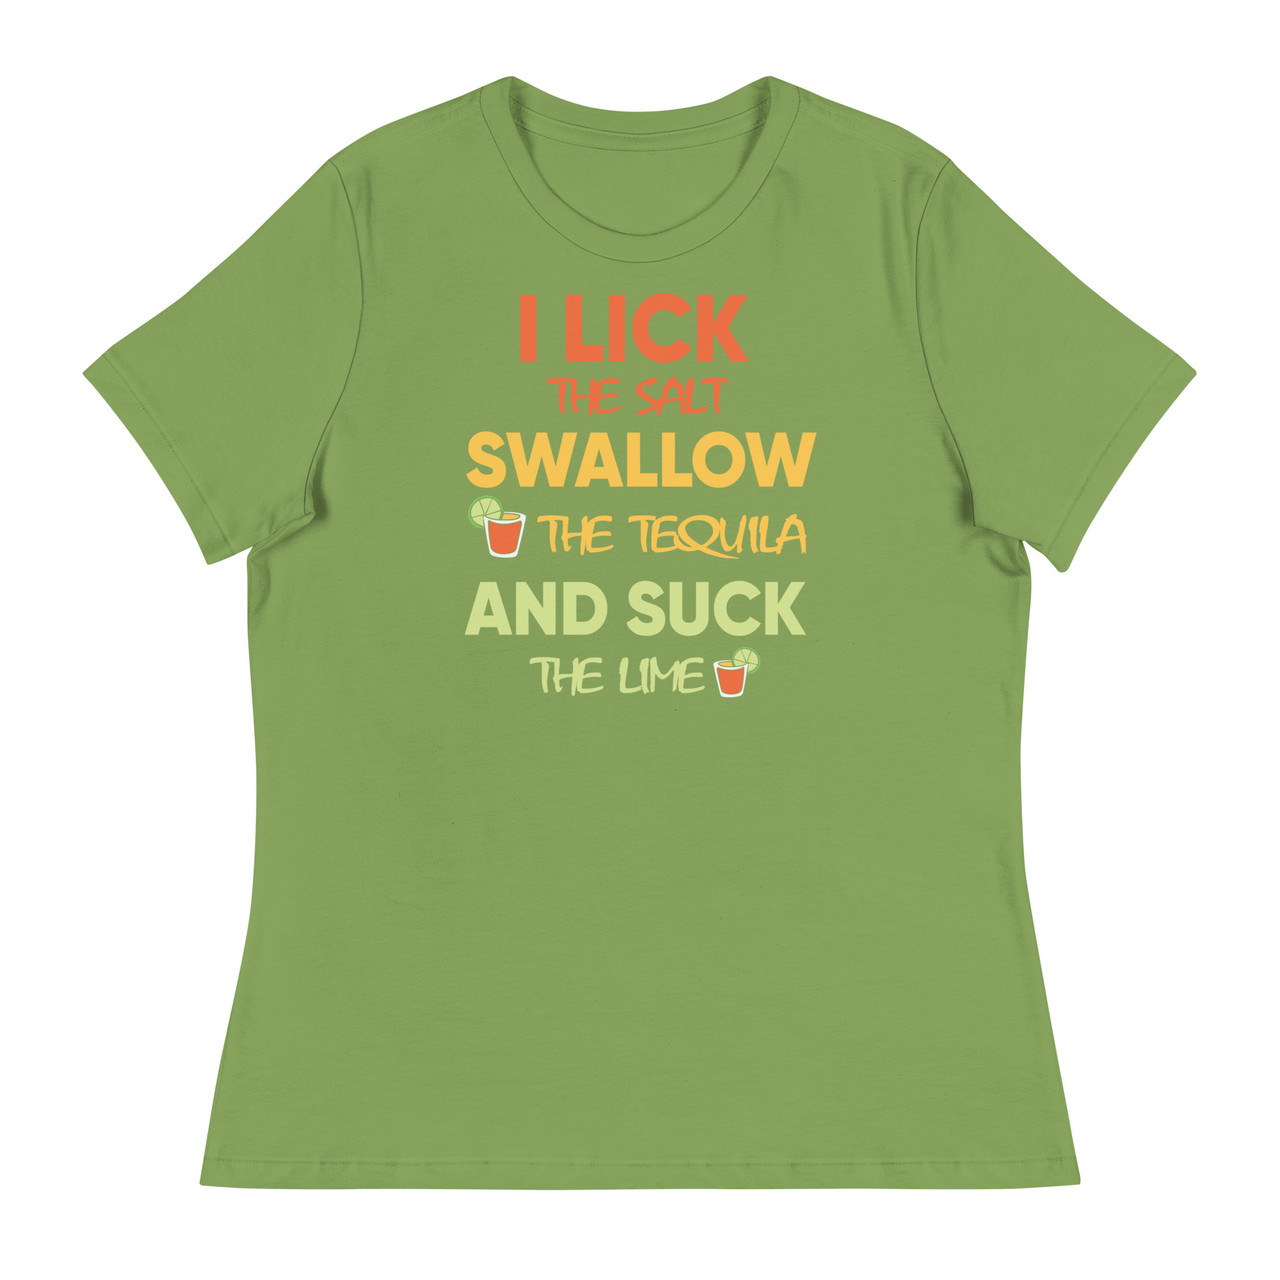 I Lick The Salt Swallow The Tequila And Suck The Women's Relaxed T-Shirt - Bella + Canvas 6400 